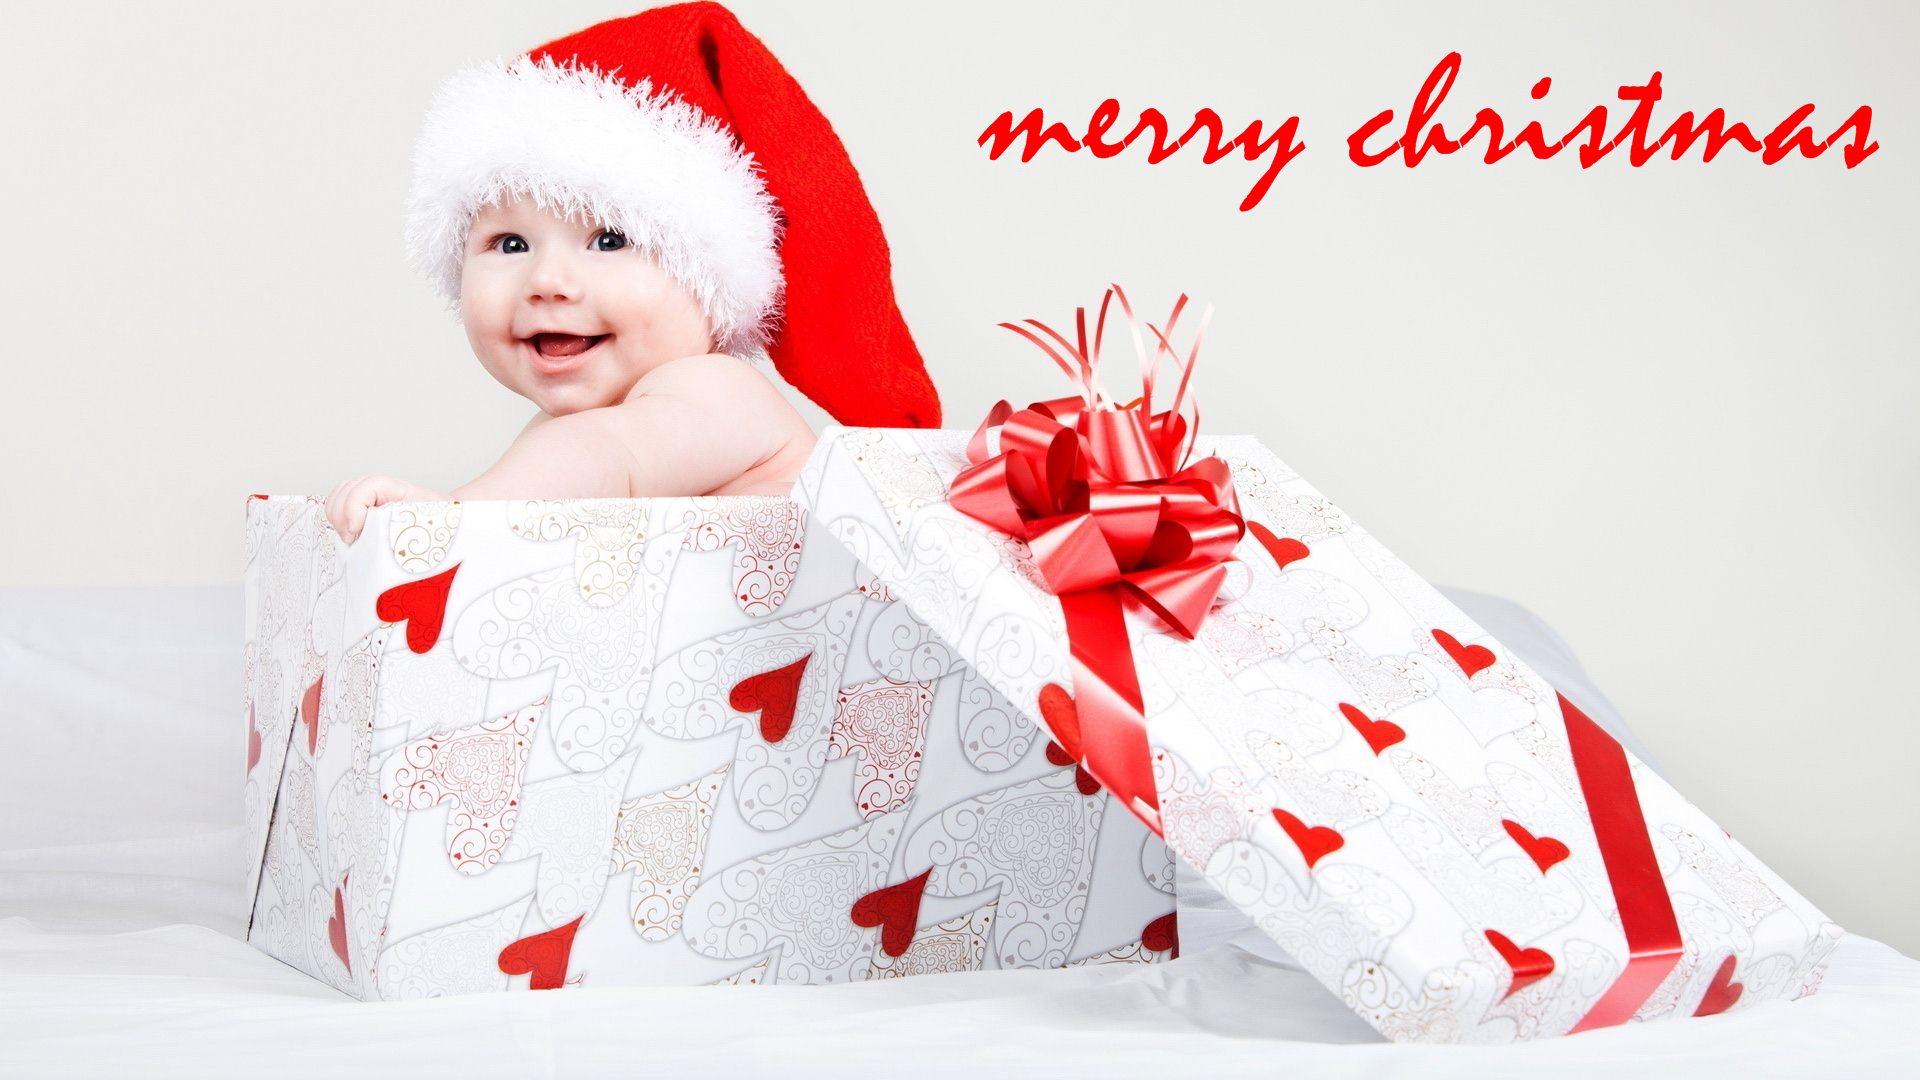 Merry Christmas Cute Baby Smile Hd Wallpaper - Merry Christmas Baby Images Hd , HD Wallpaper & Backgrounds